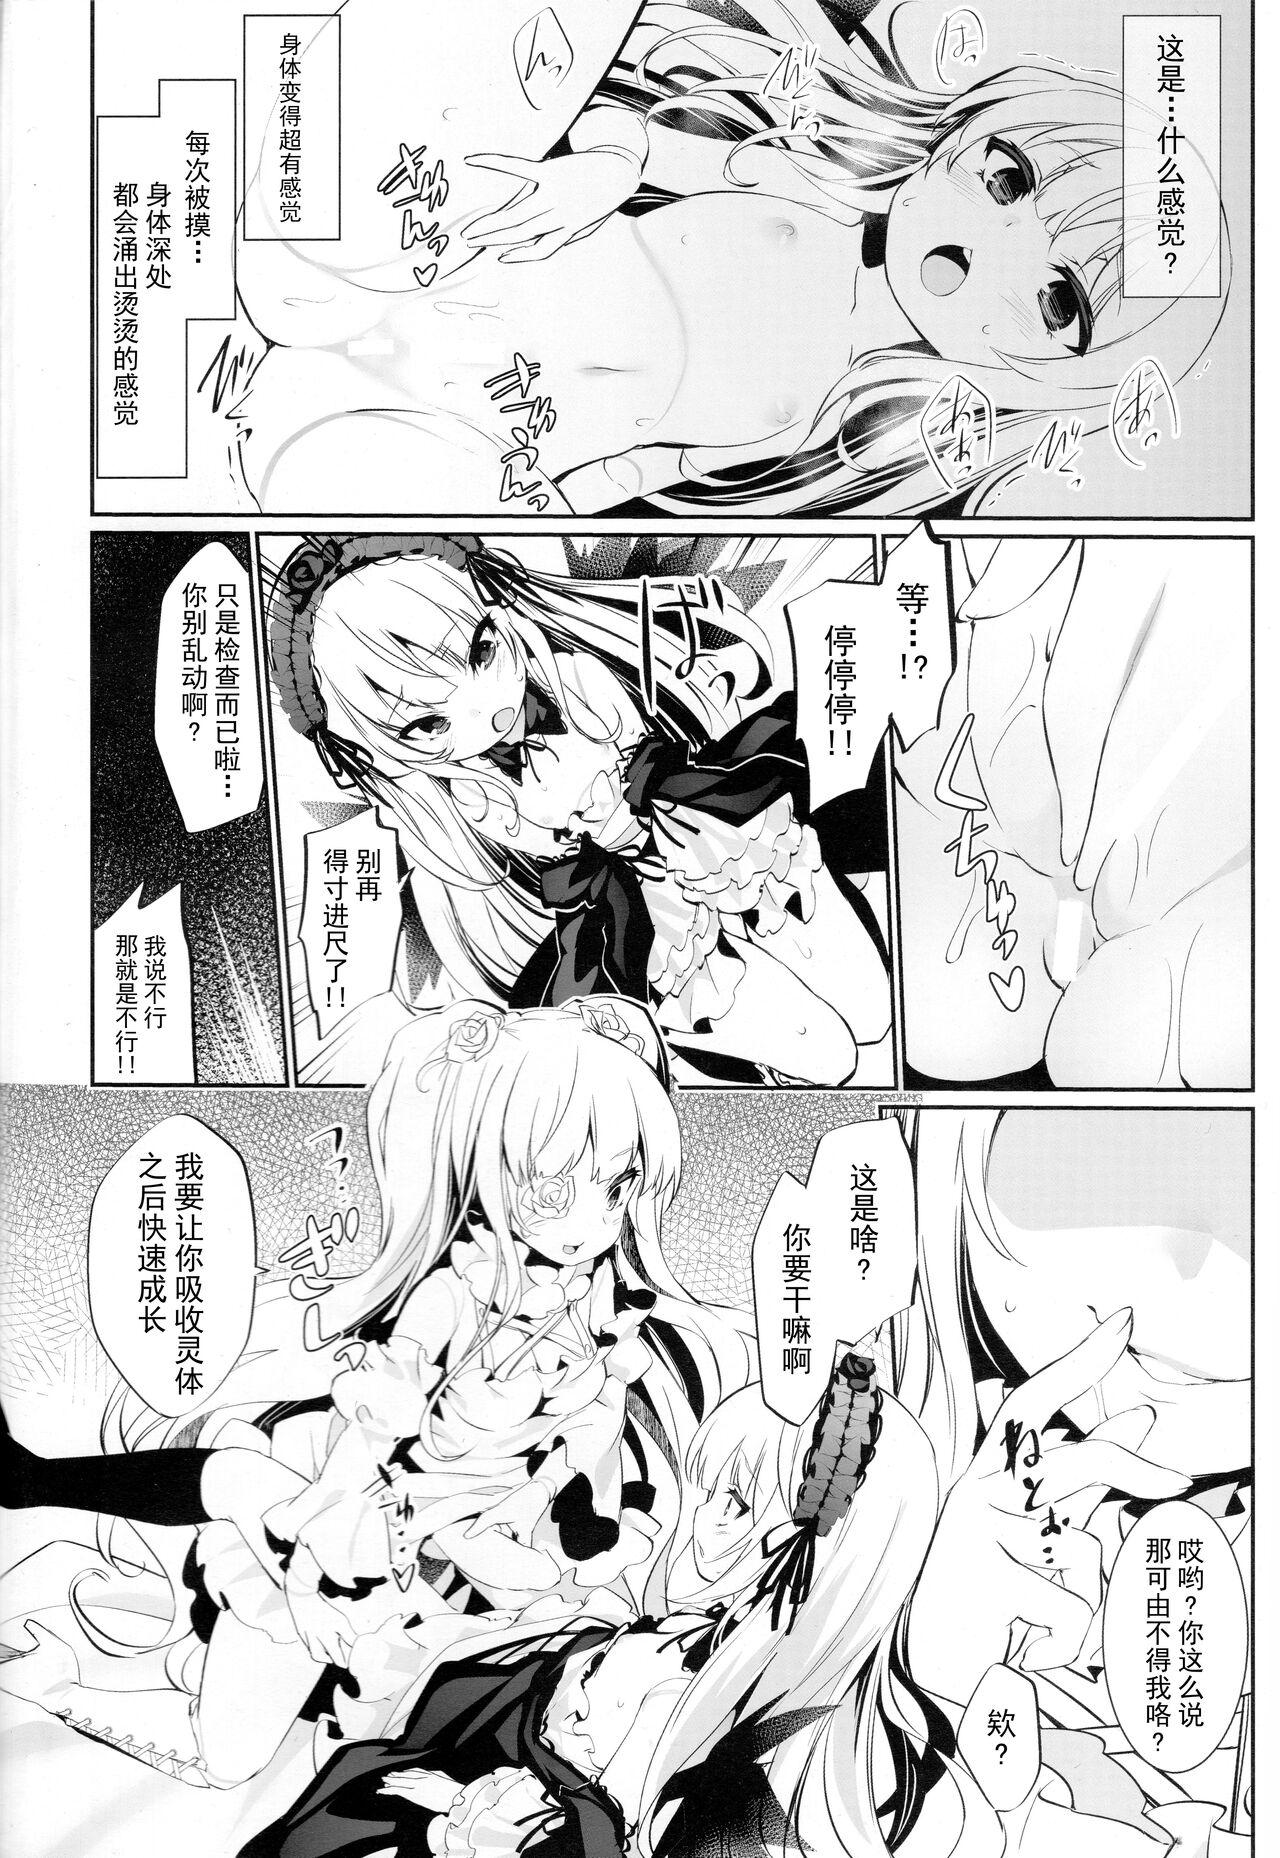 Lezbi Glamour Growth - Rozen maiden Family Taboo - Page 5